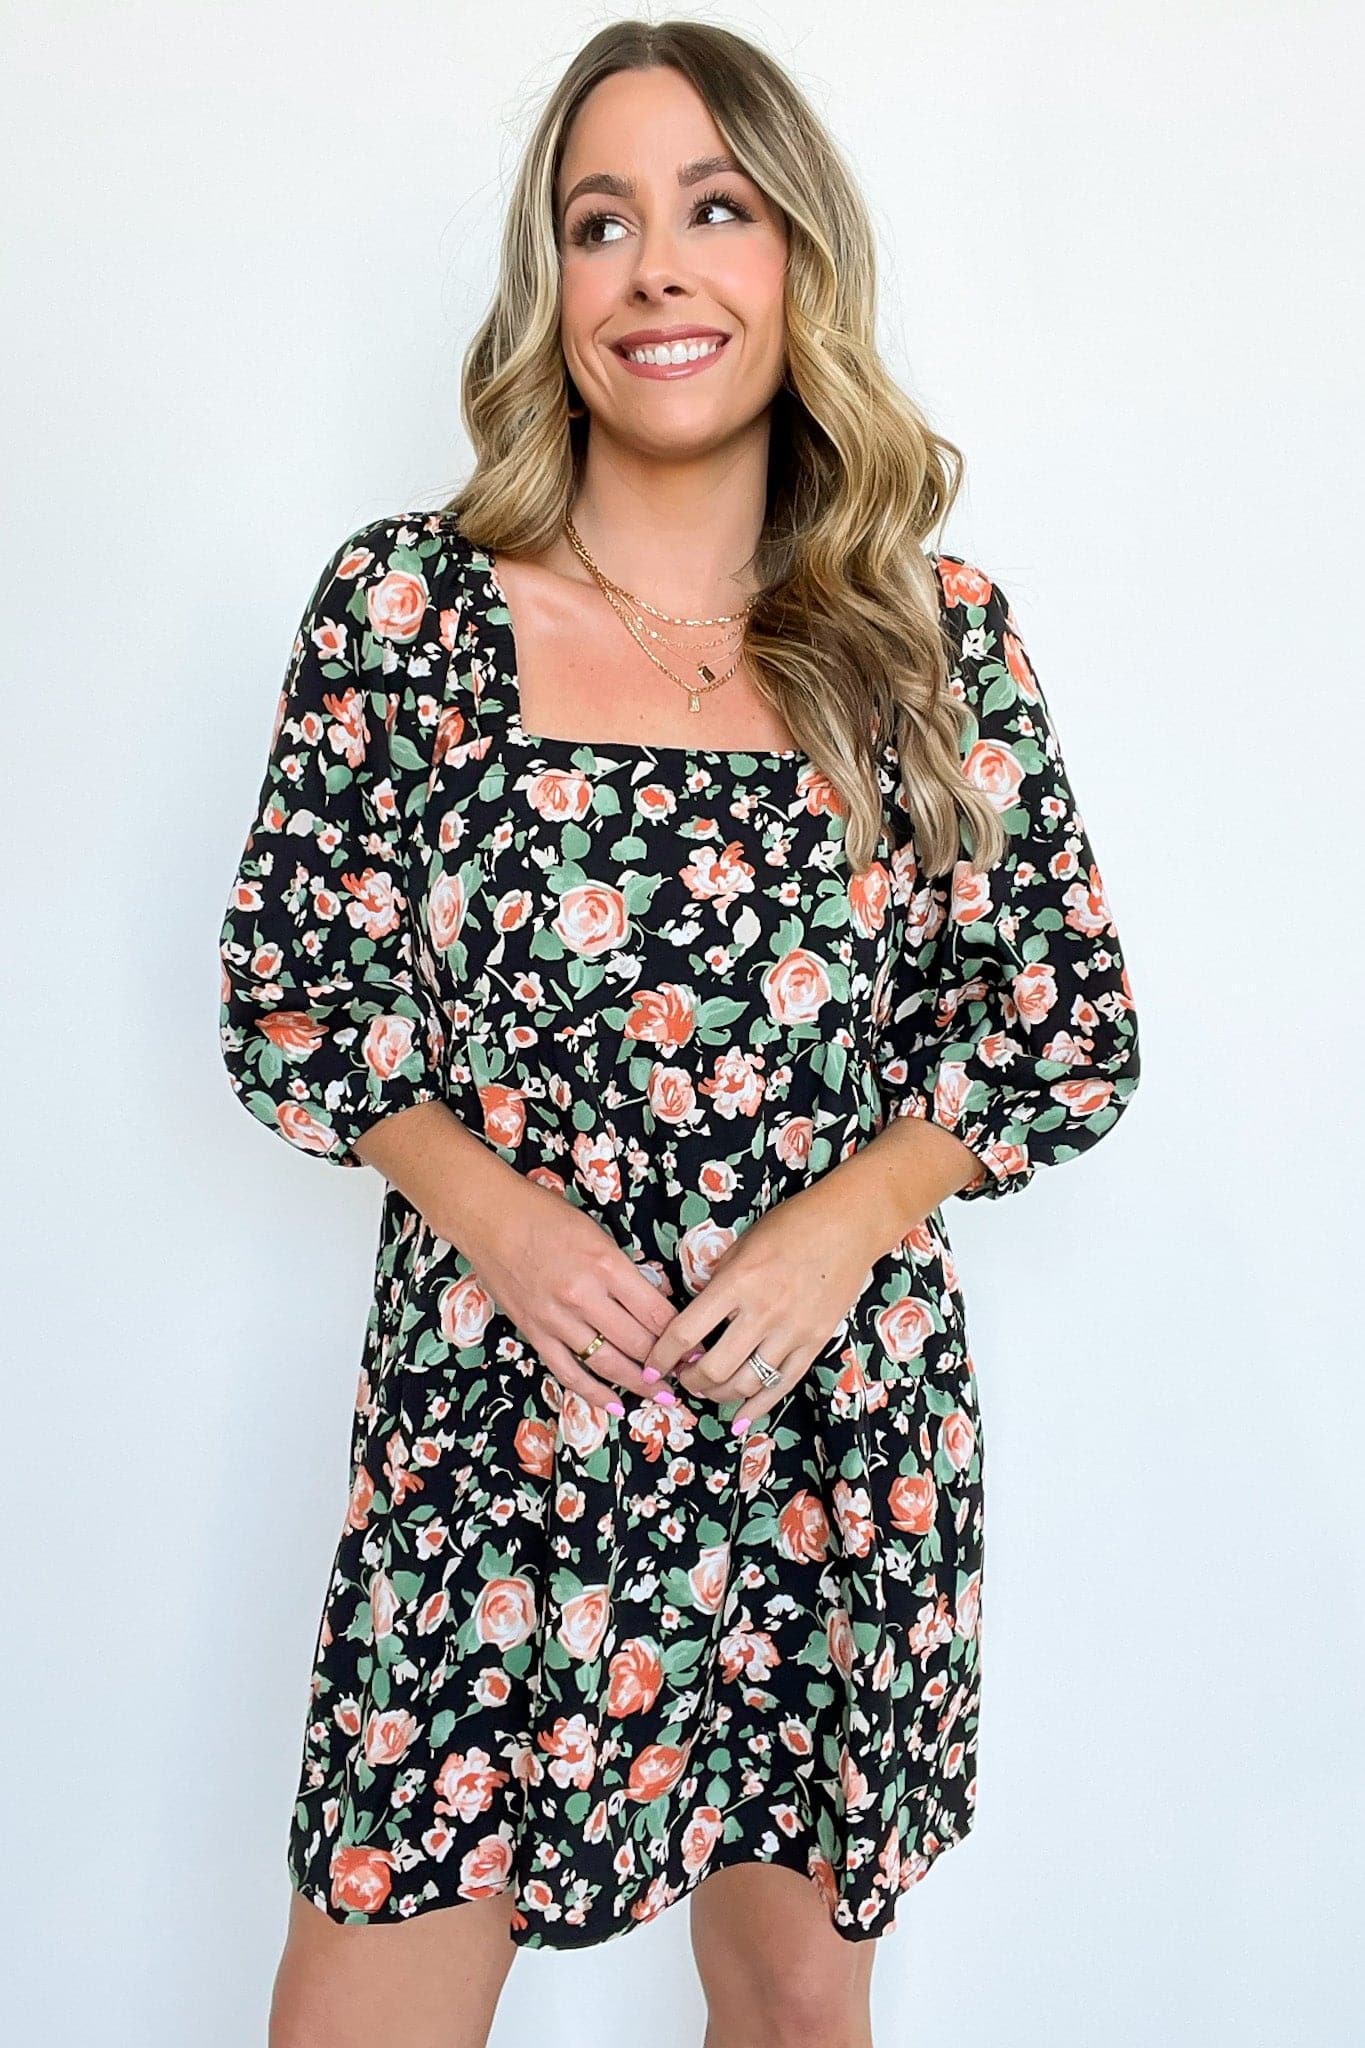  Darling Whimsy Floral Print Puff Sleeve Dress - FINAL SALE - Madison and Mallory